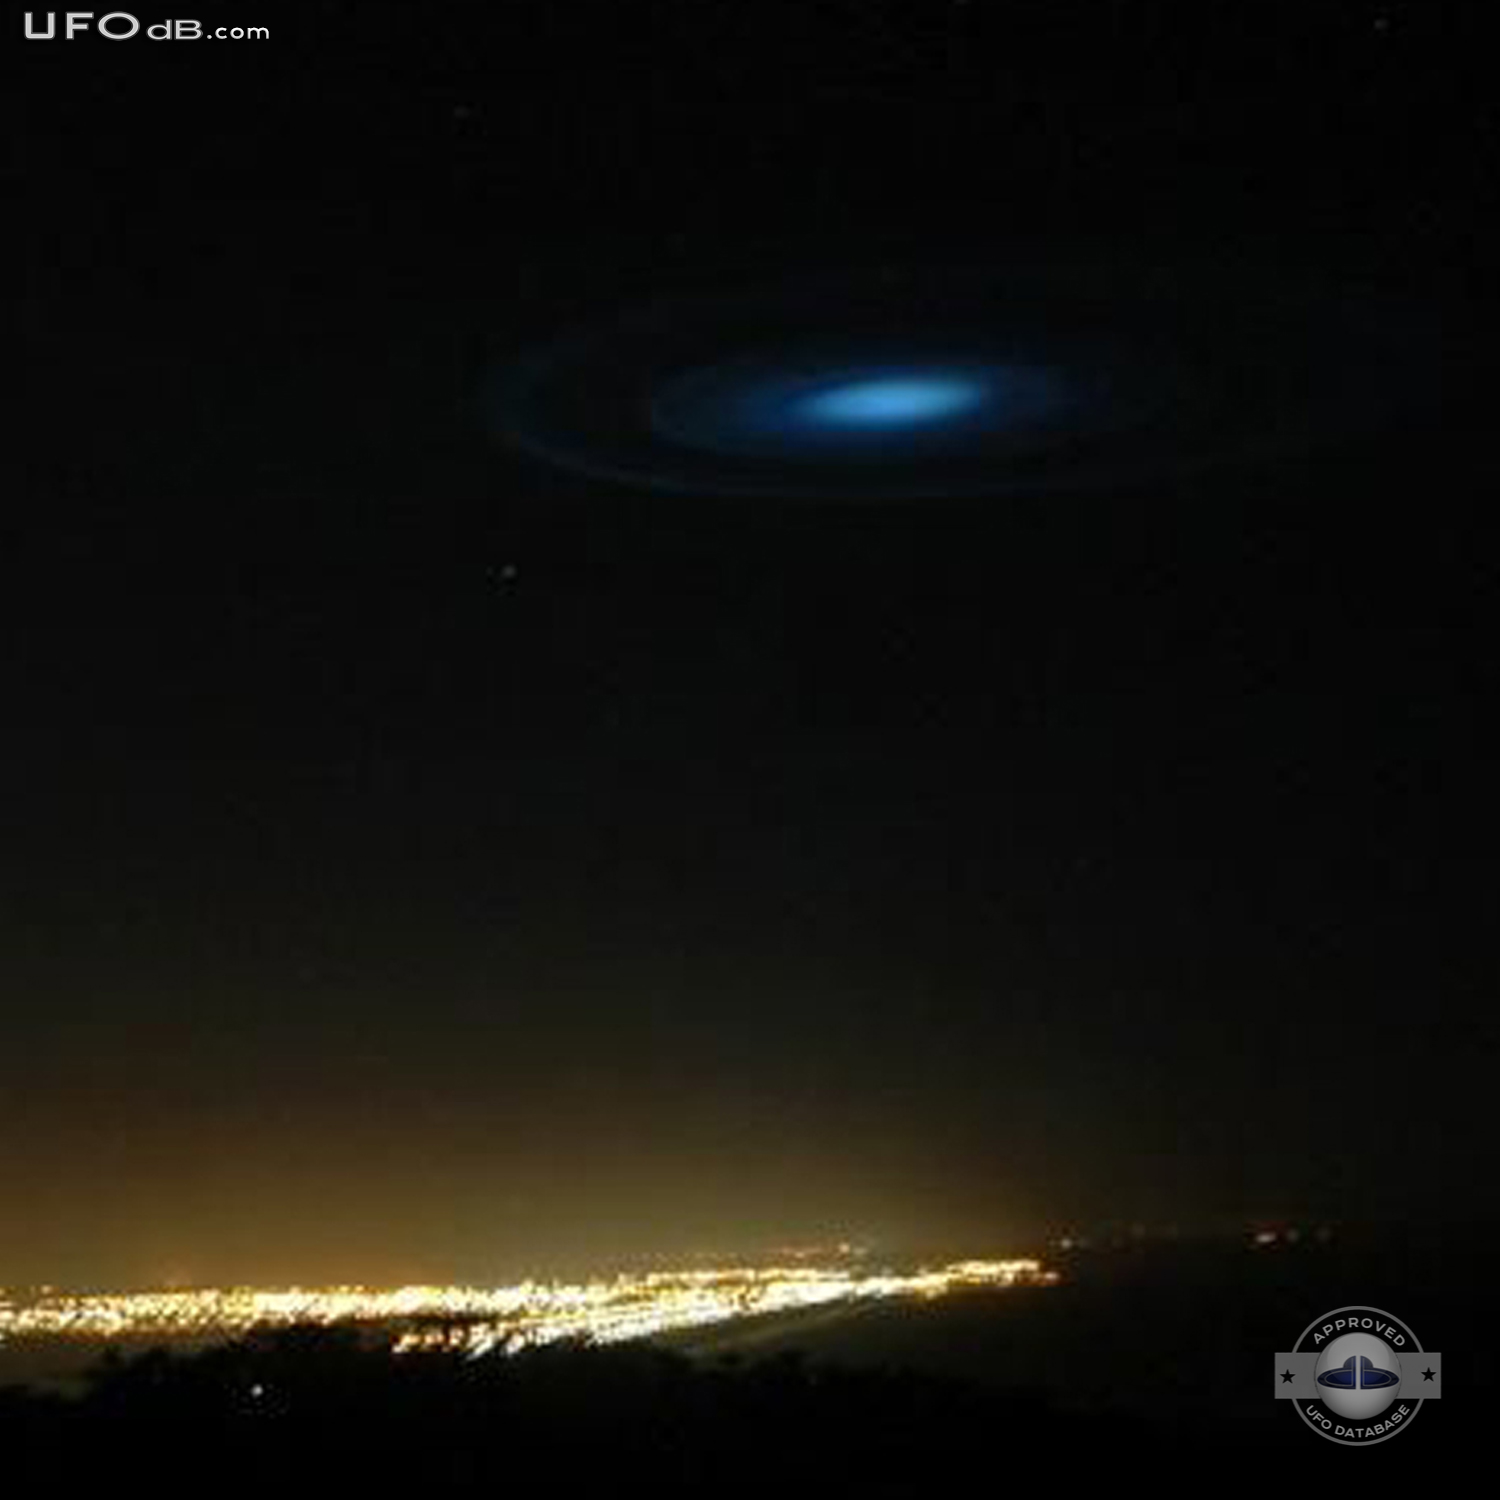 Christchurch New Zealand | Blue Glowing UFO on Picture | March 29 2011 UFO Picture #302-3